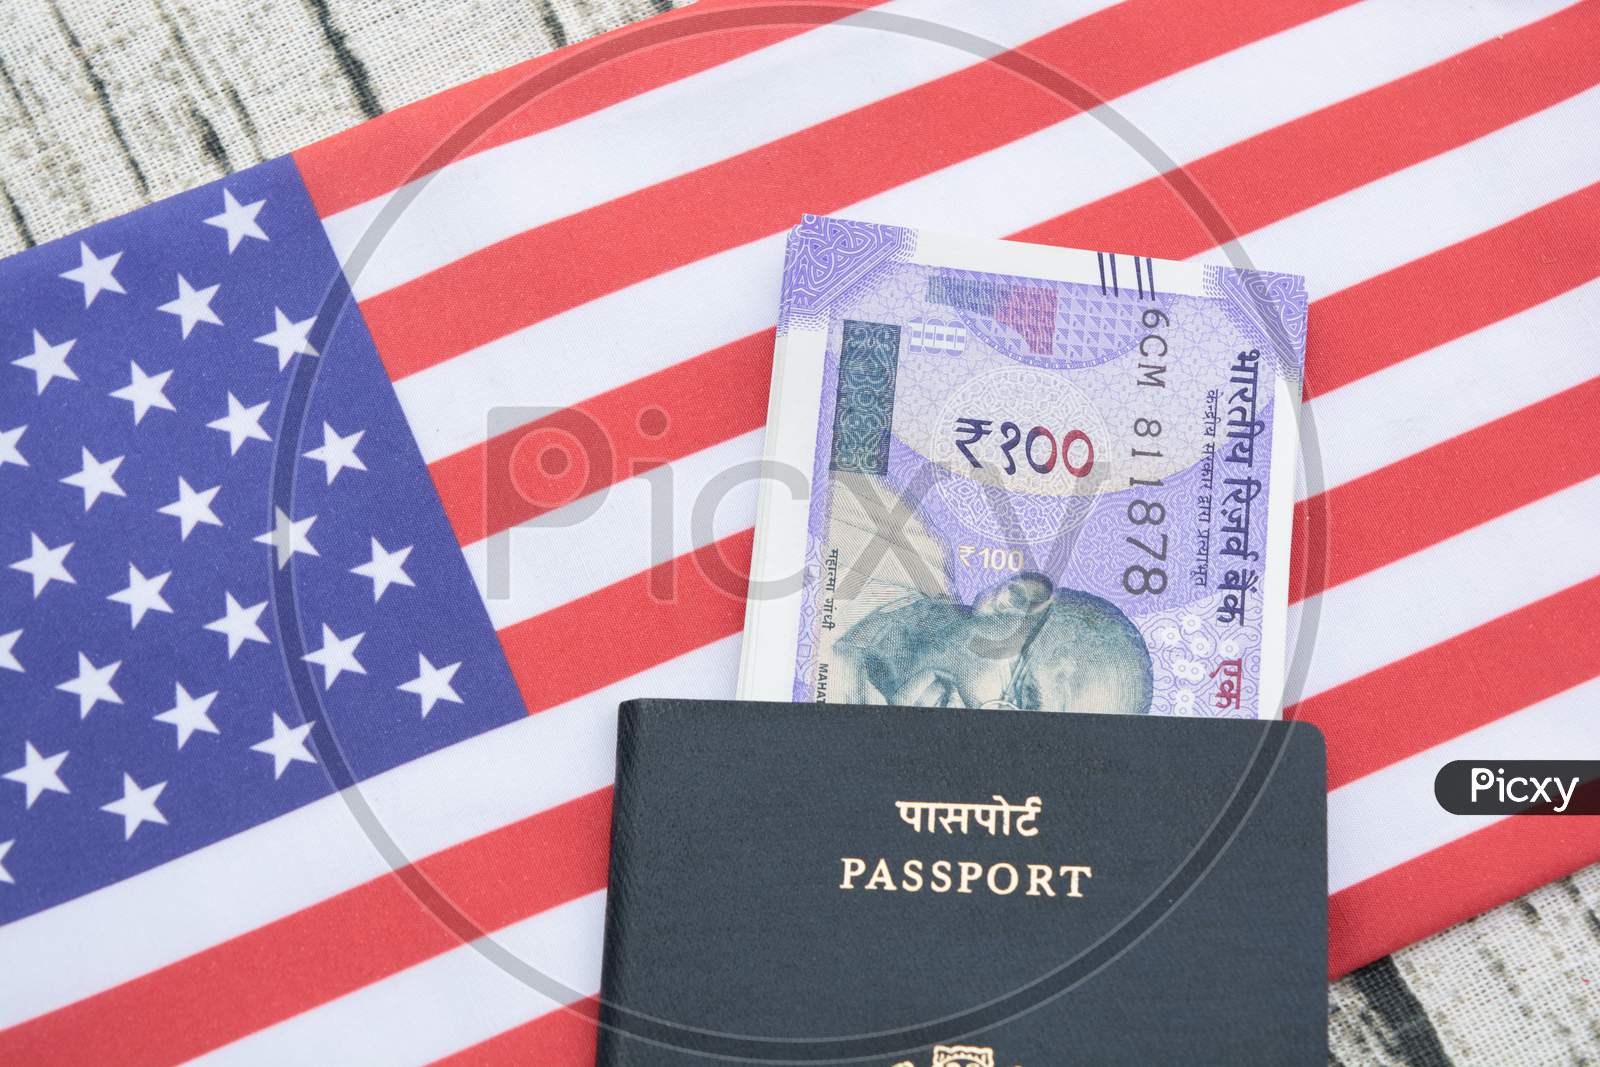 Closeup Of Indian Passport With Currency On Usa Or America'S Flag As A Background